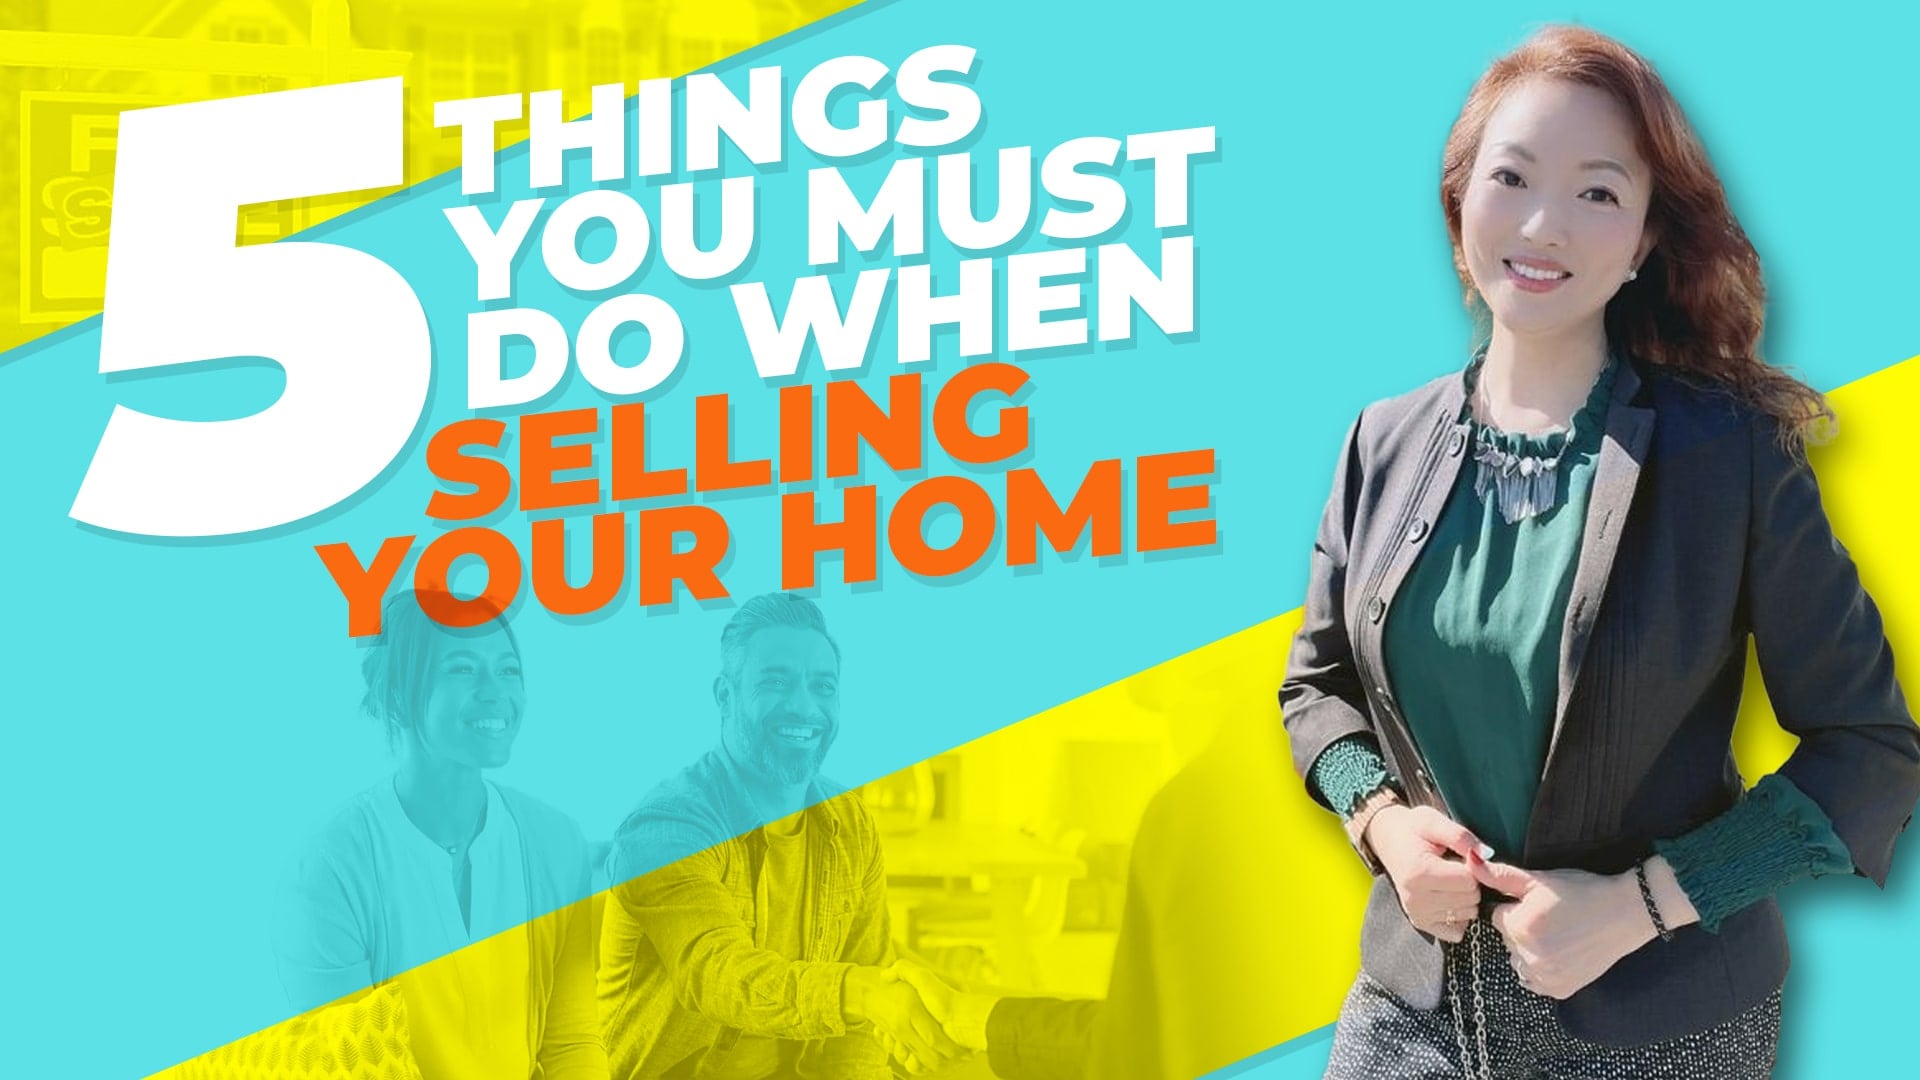 5 things you must do when selling your home